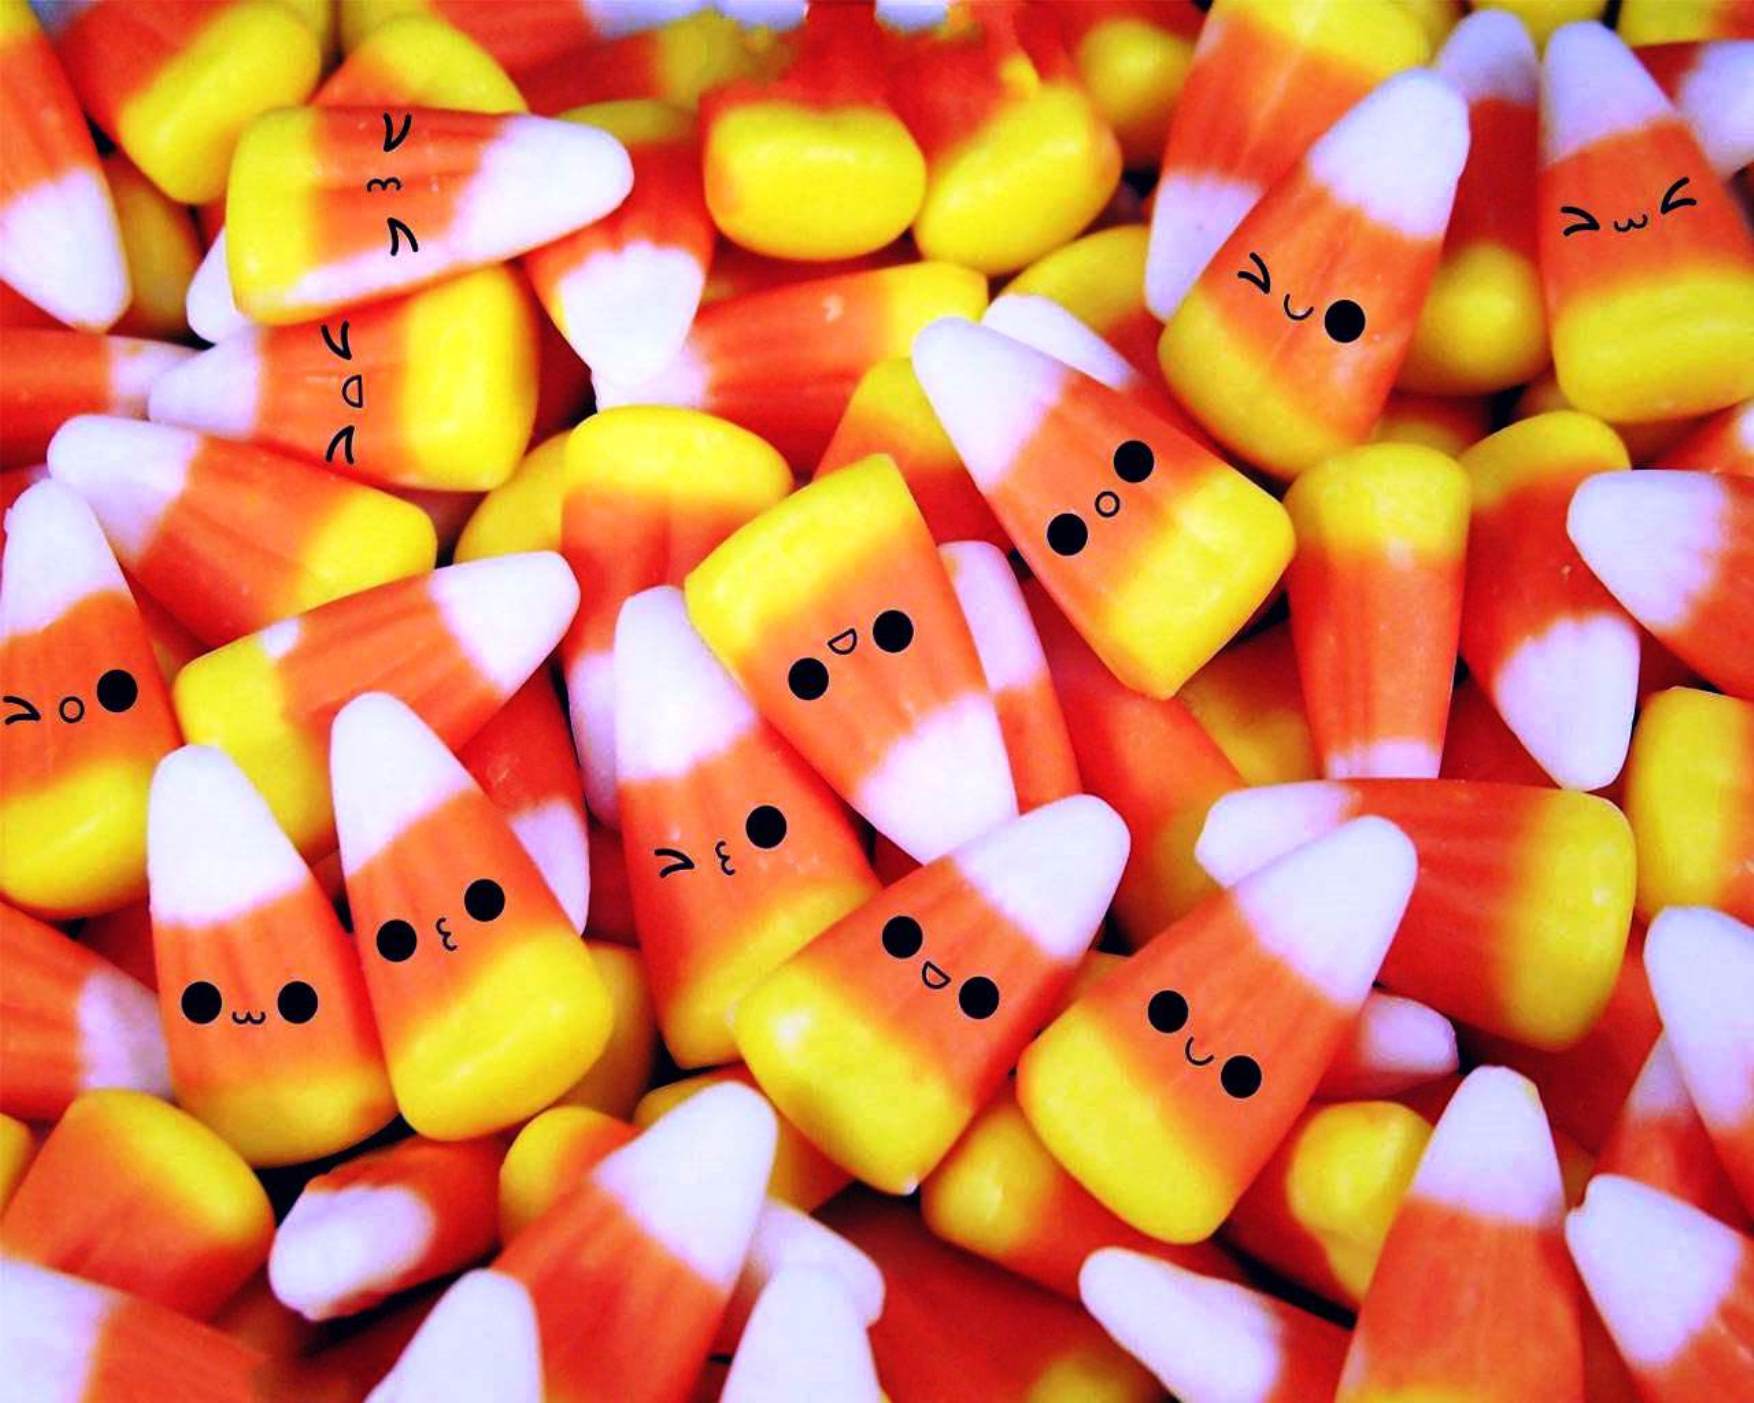  Candy Corn Wallpapers Wallpaper Cave